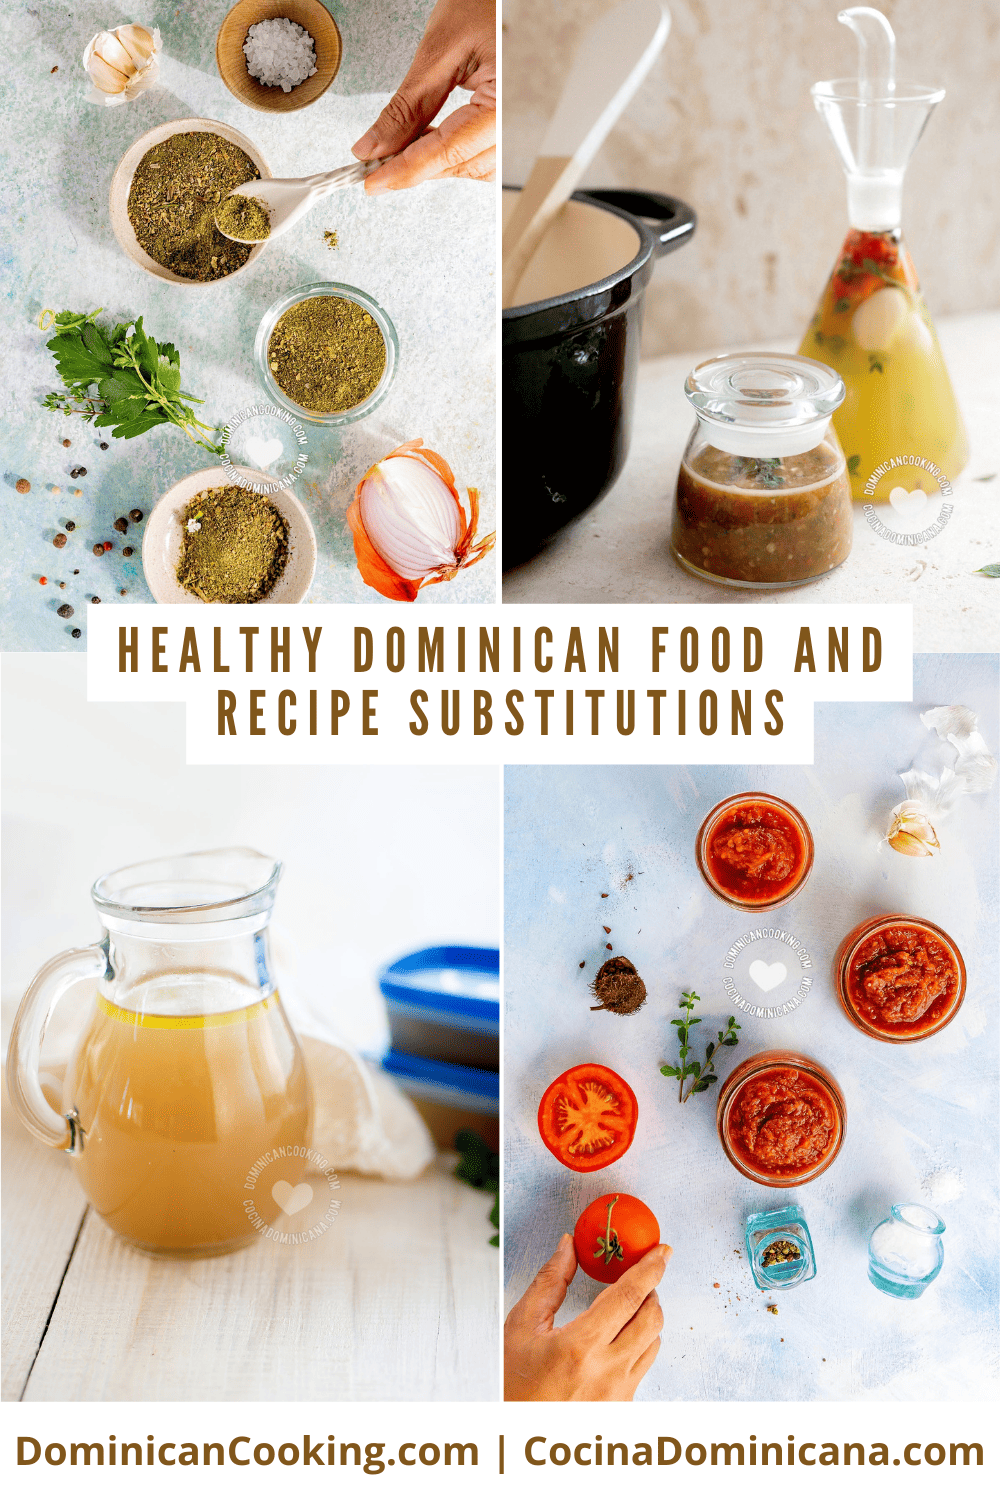 Healthy dominican food and substitutions.